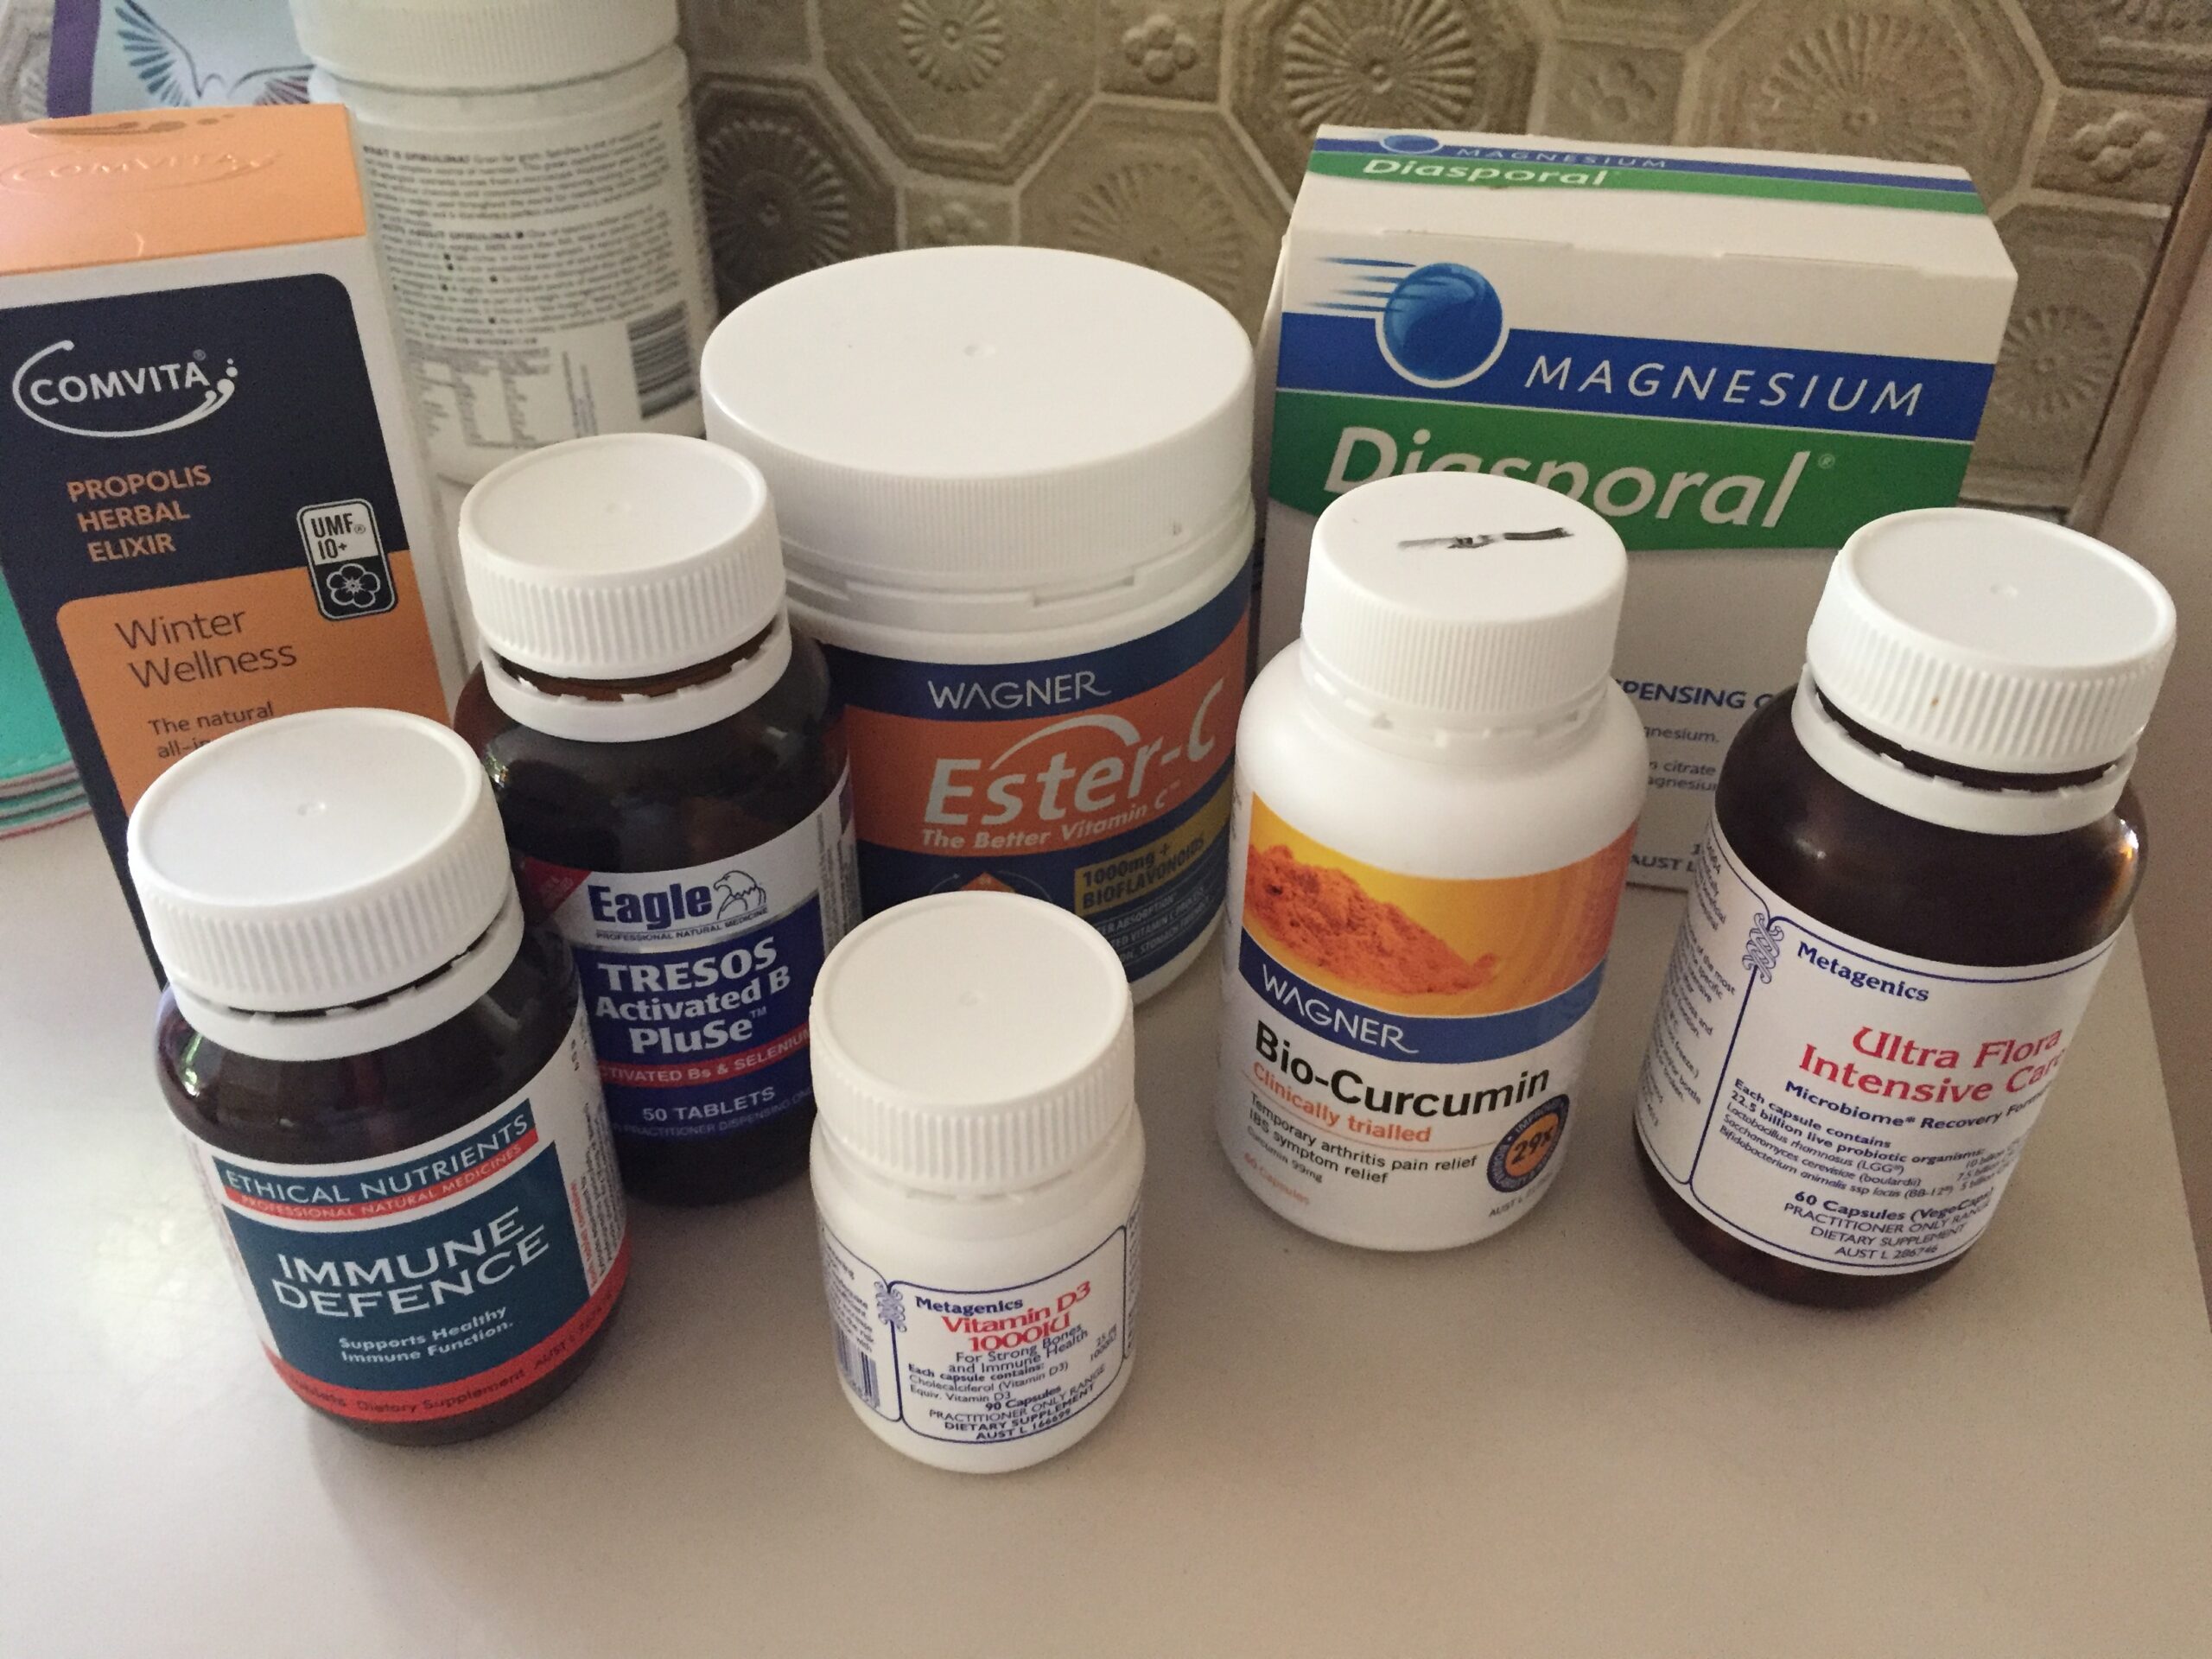 I woke up with a sore throat… Want to see what I am doing about it?